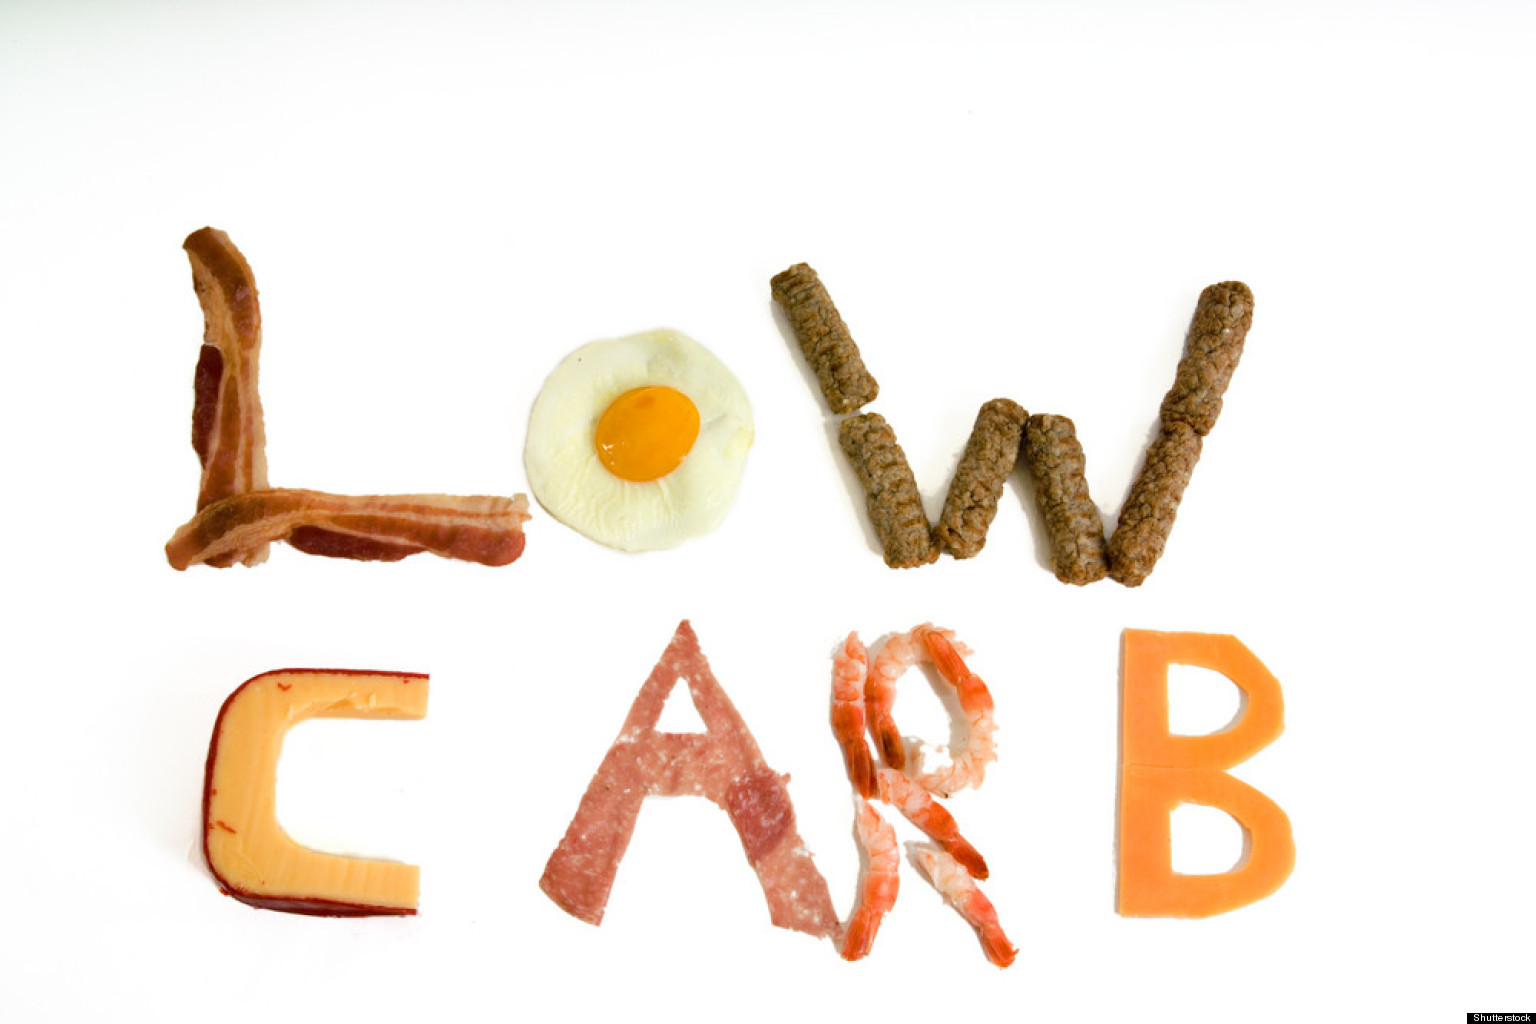 Download this Carbs Workout Facebook picture